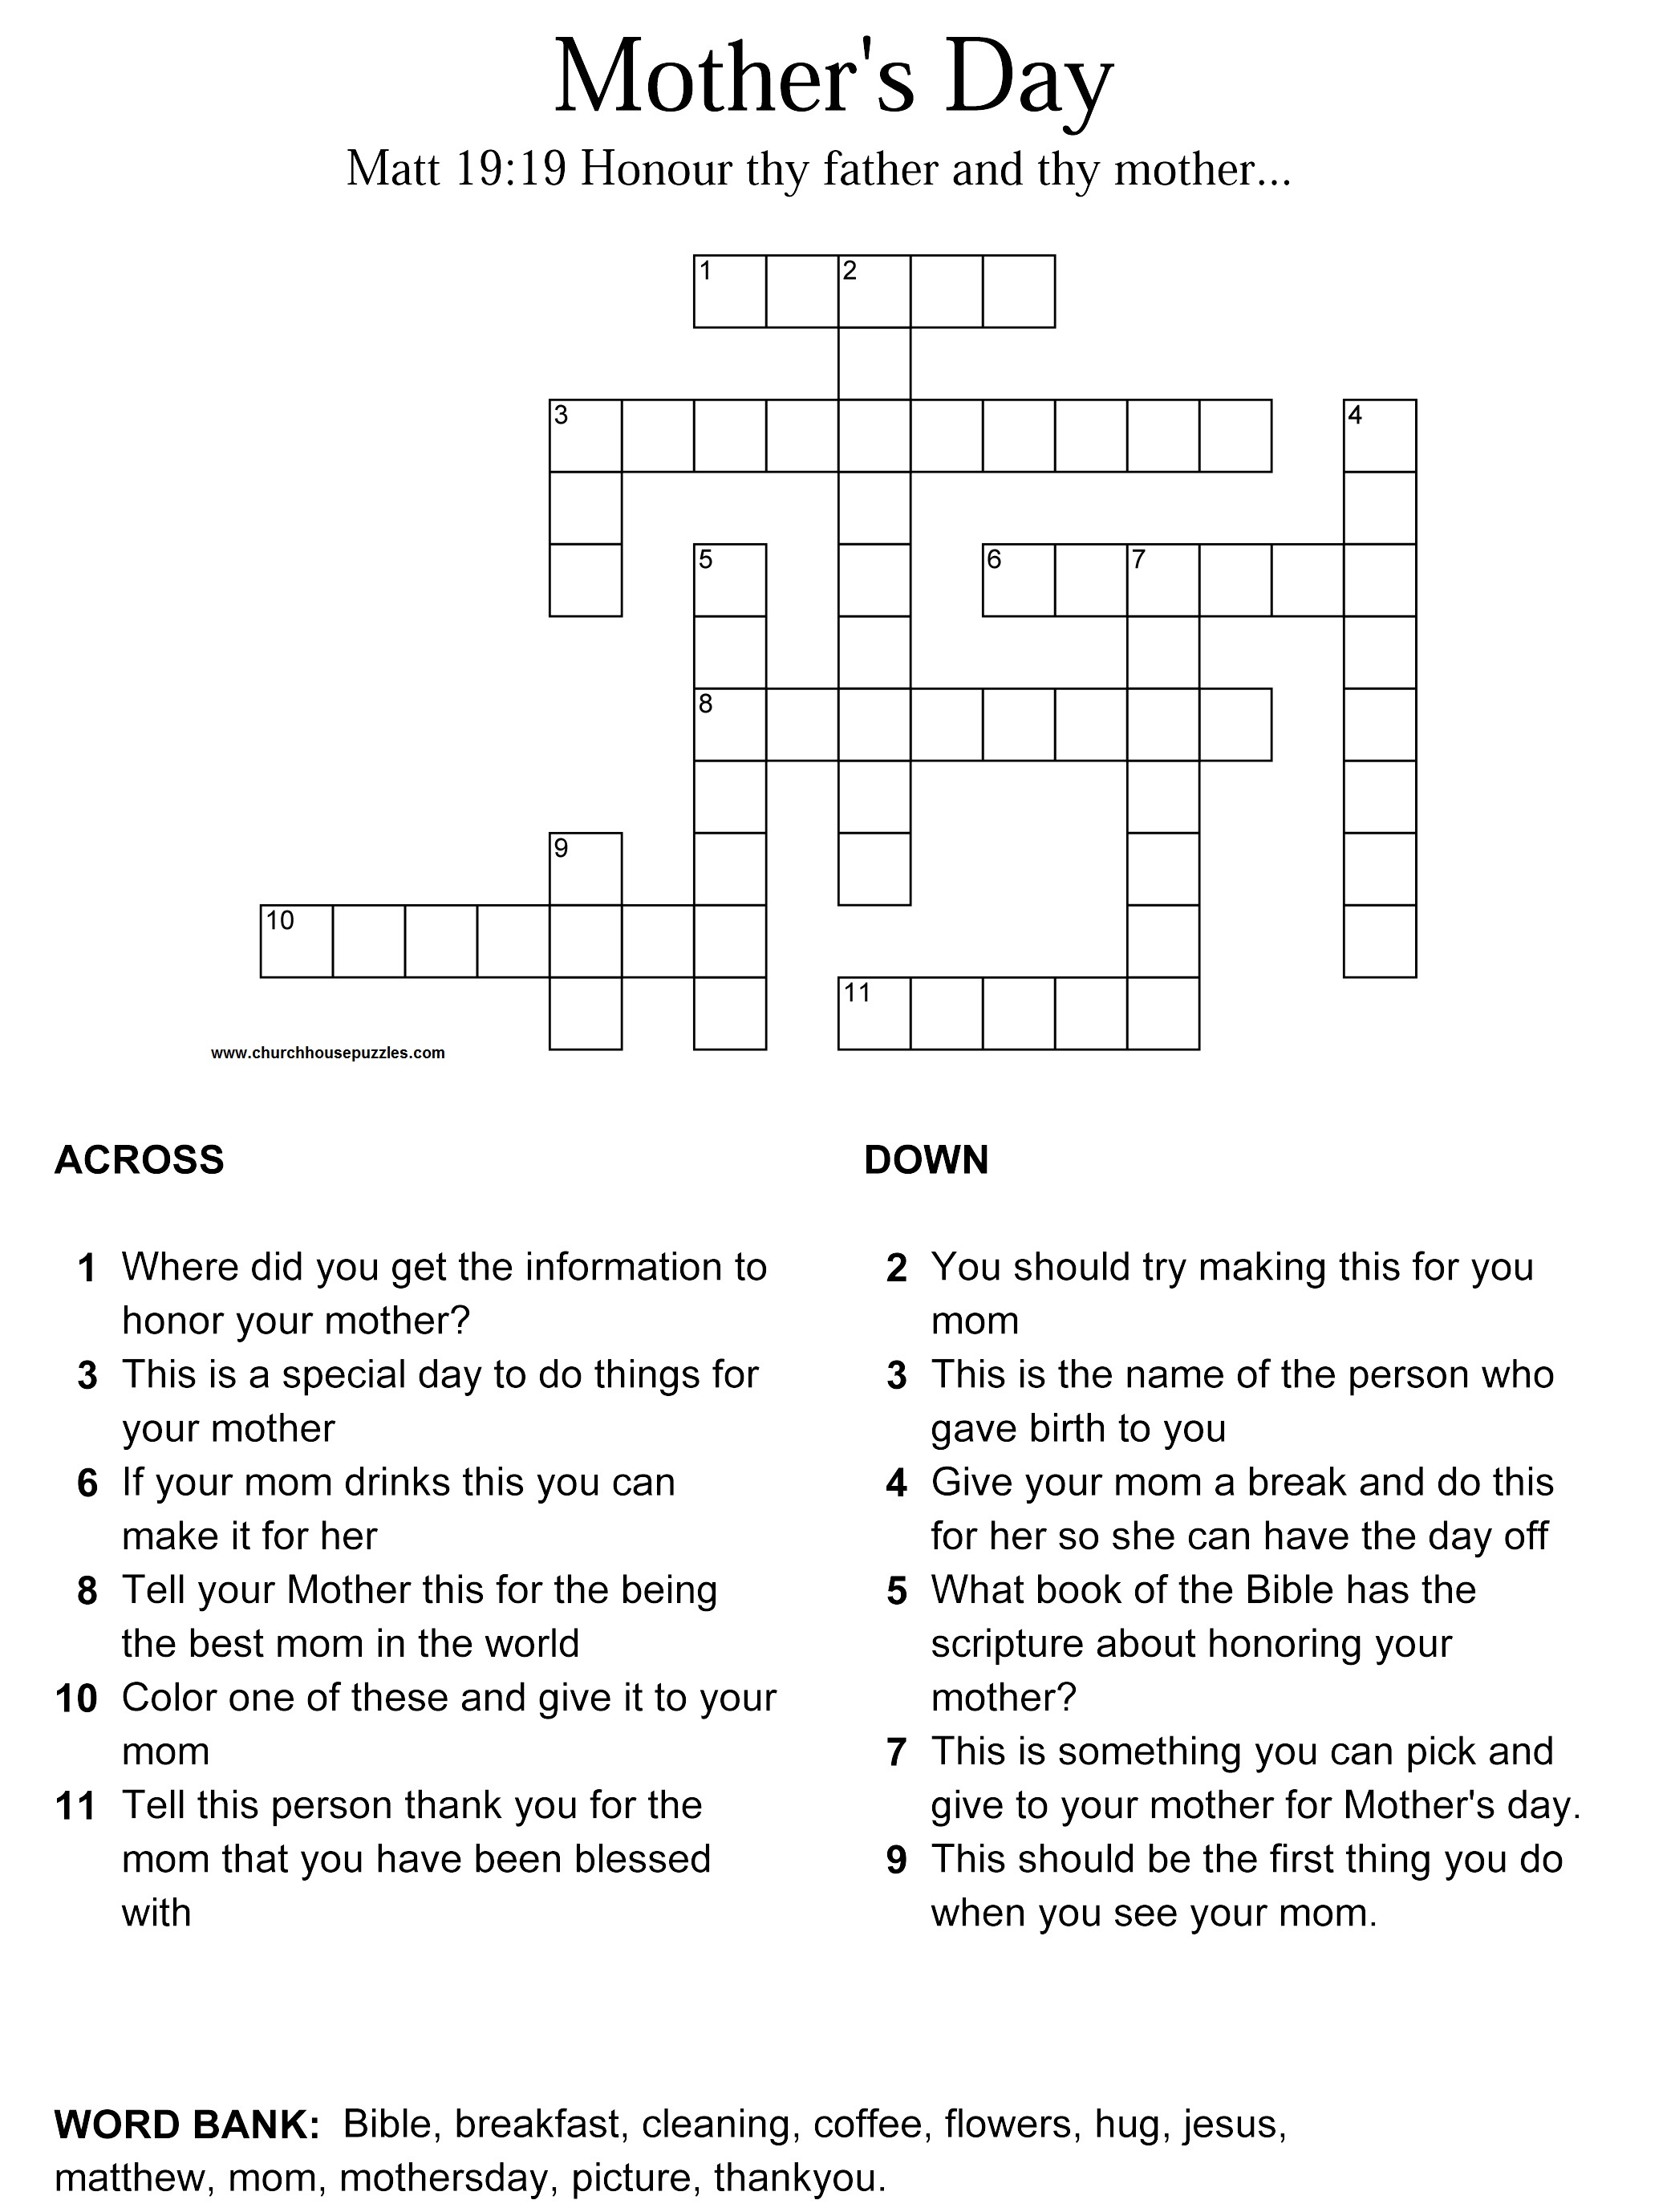 mother-s-day-crossword-puzzle